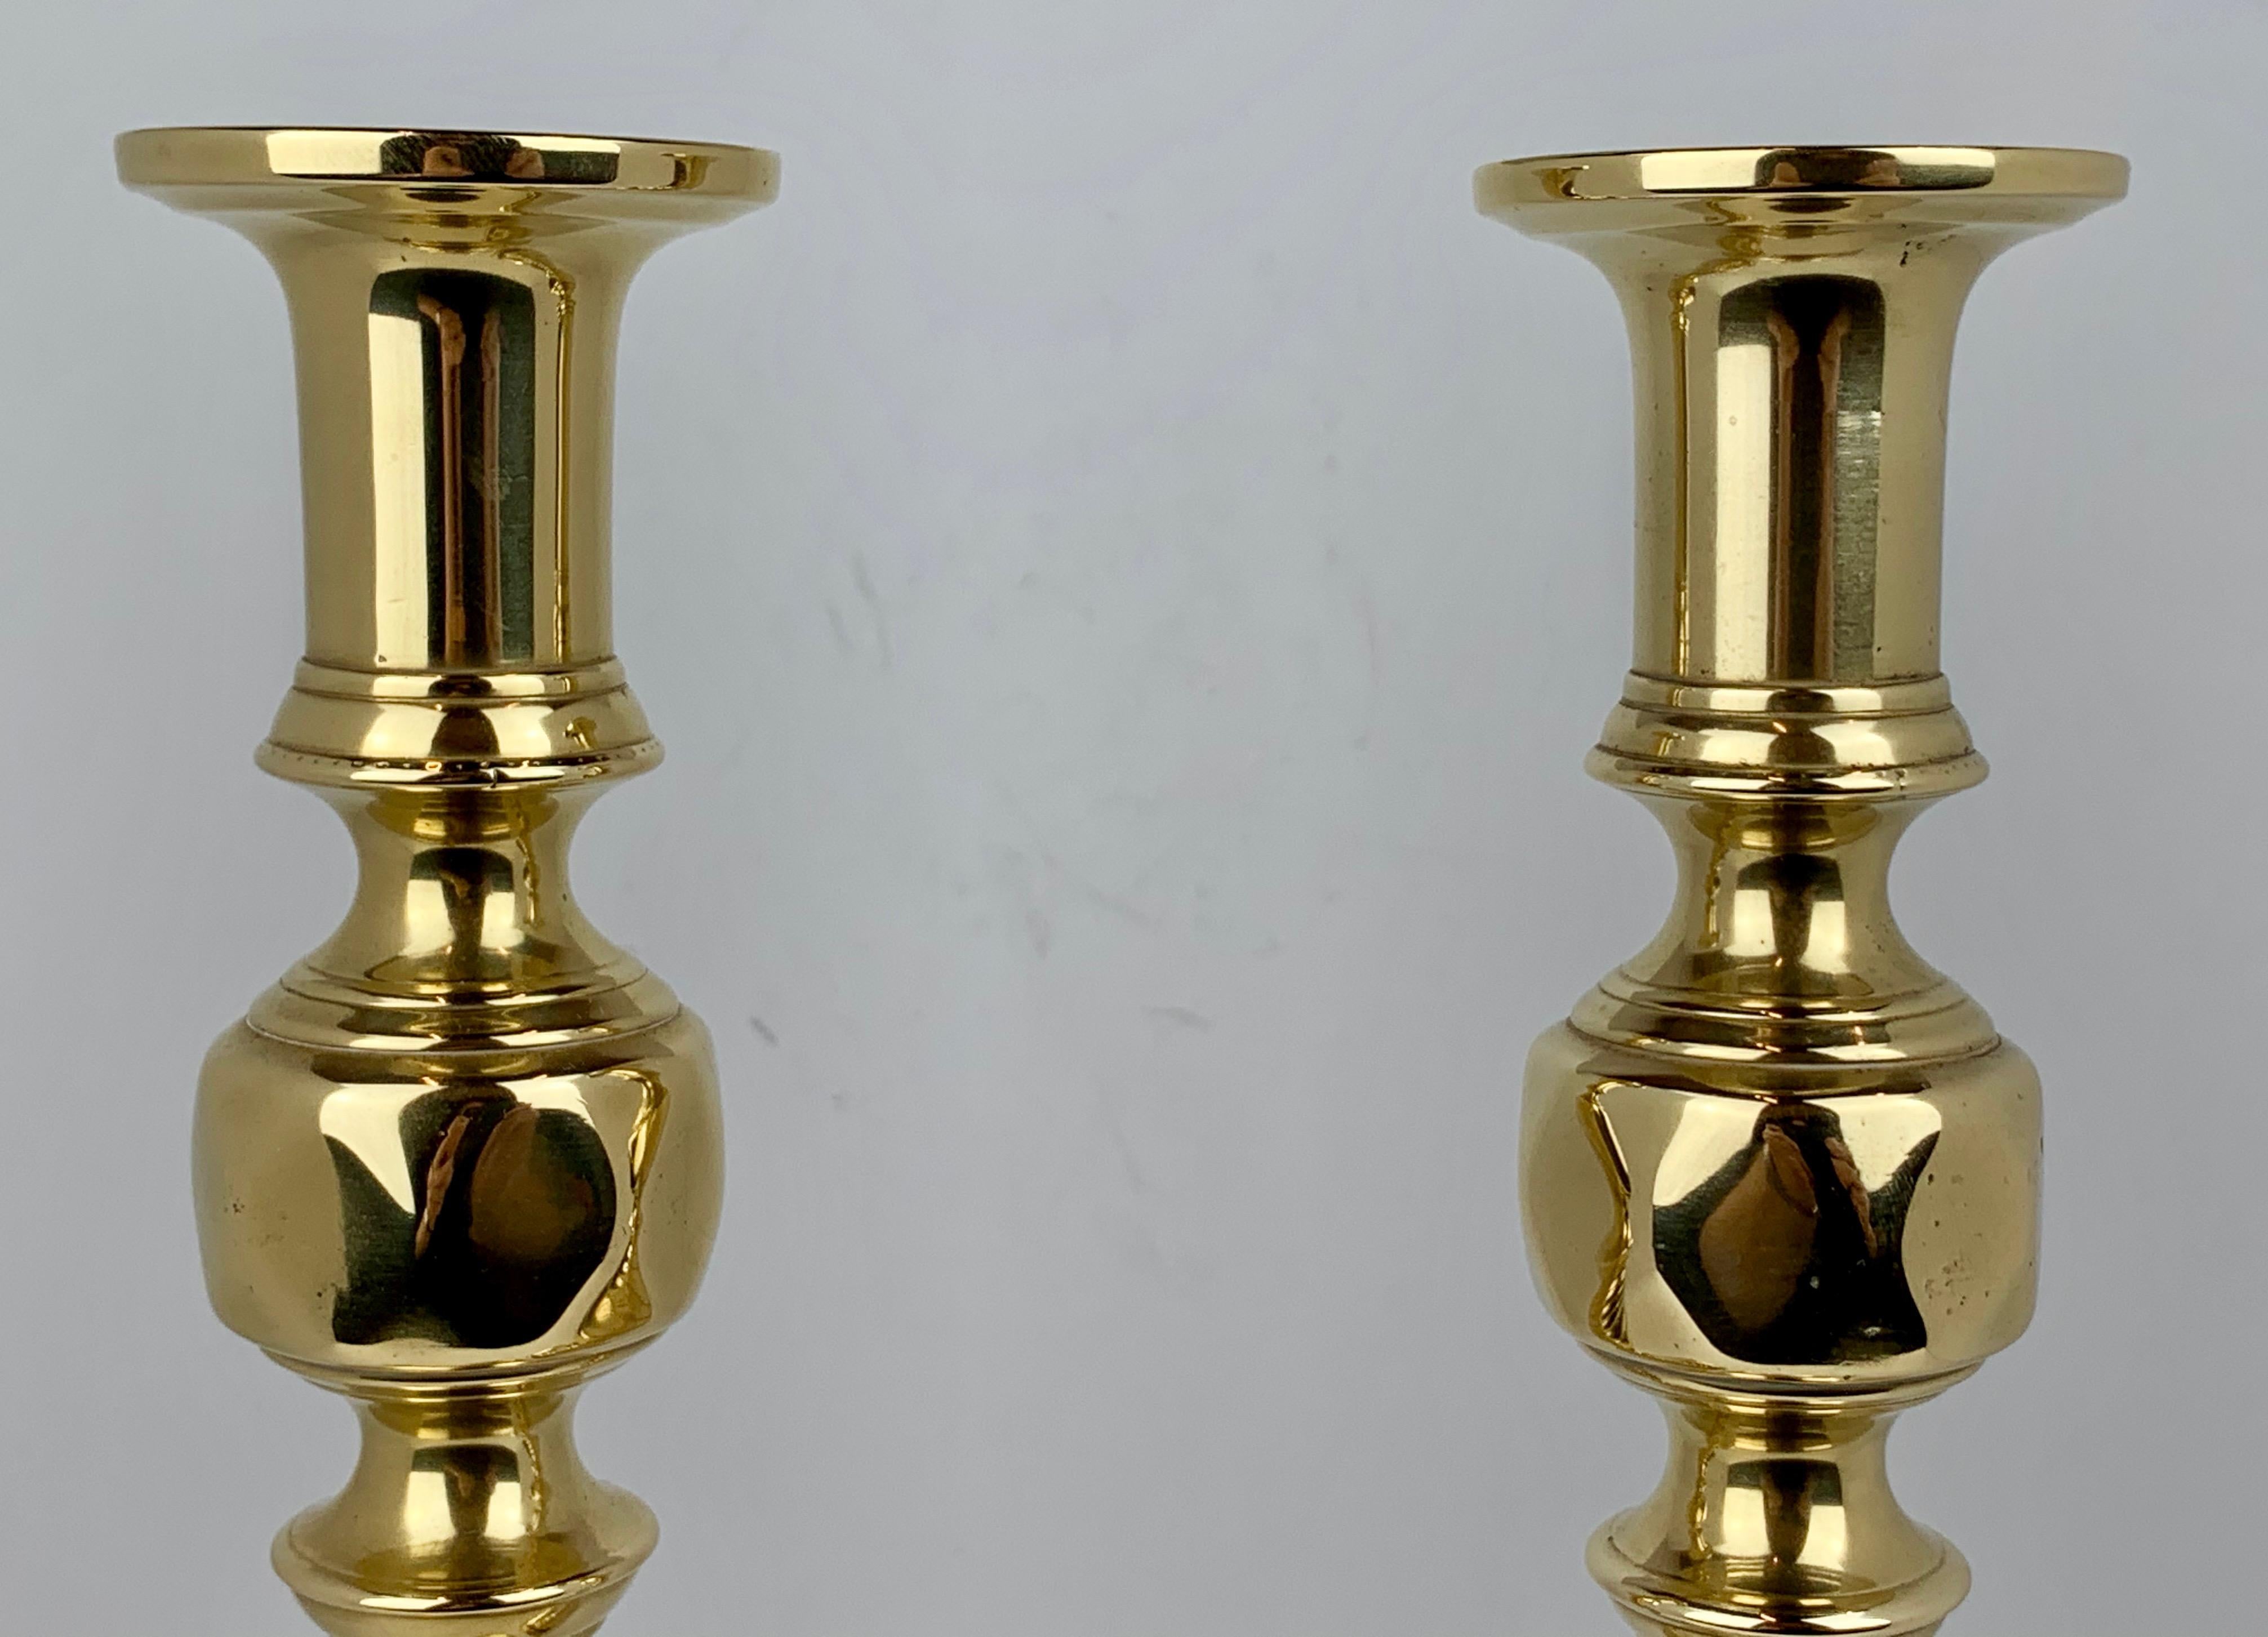 A pair of 19th century English brass push-up candlesticks. If you look closely at the photos you will see that their English registered marks match, which is very important for this tells us they were made as a pair. The push-up mechanism is intact